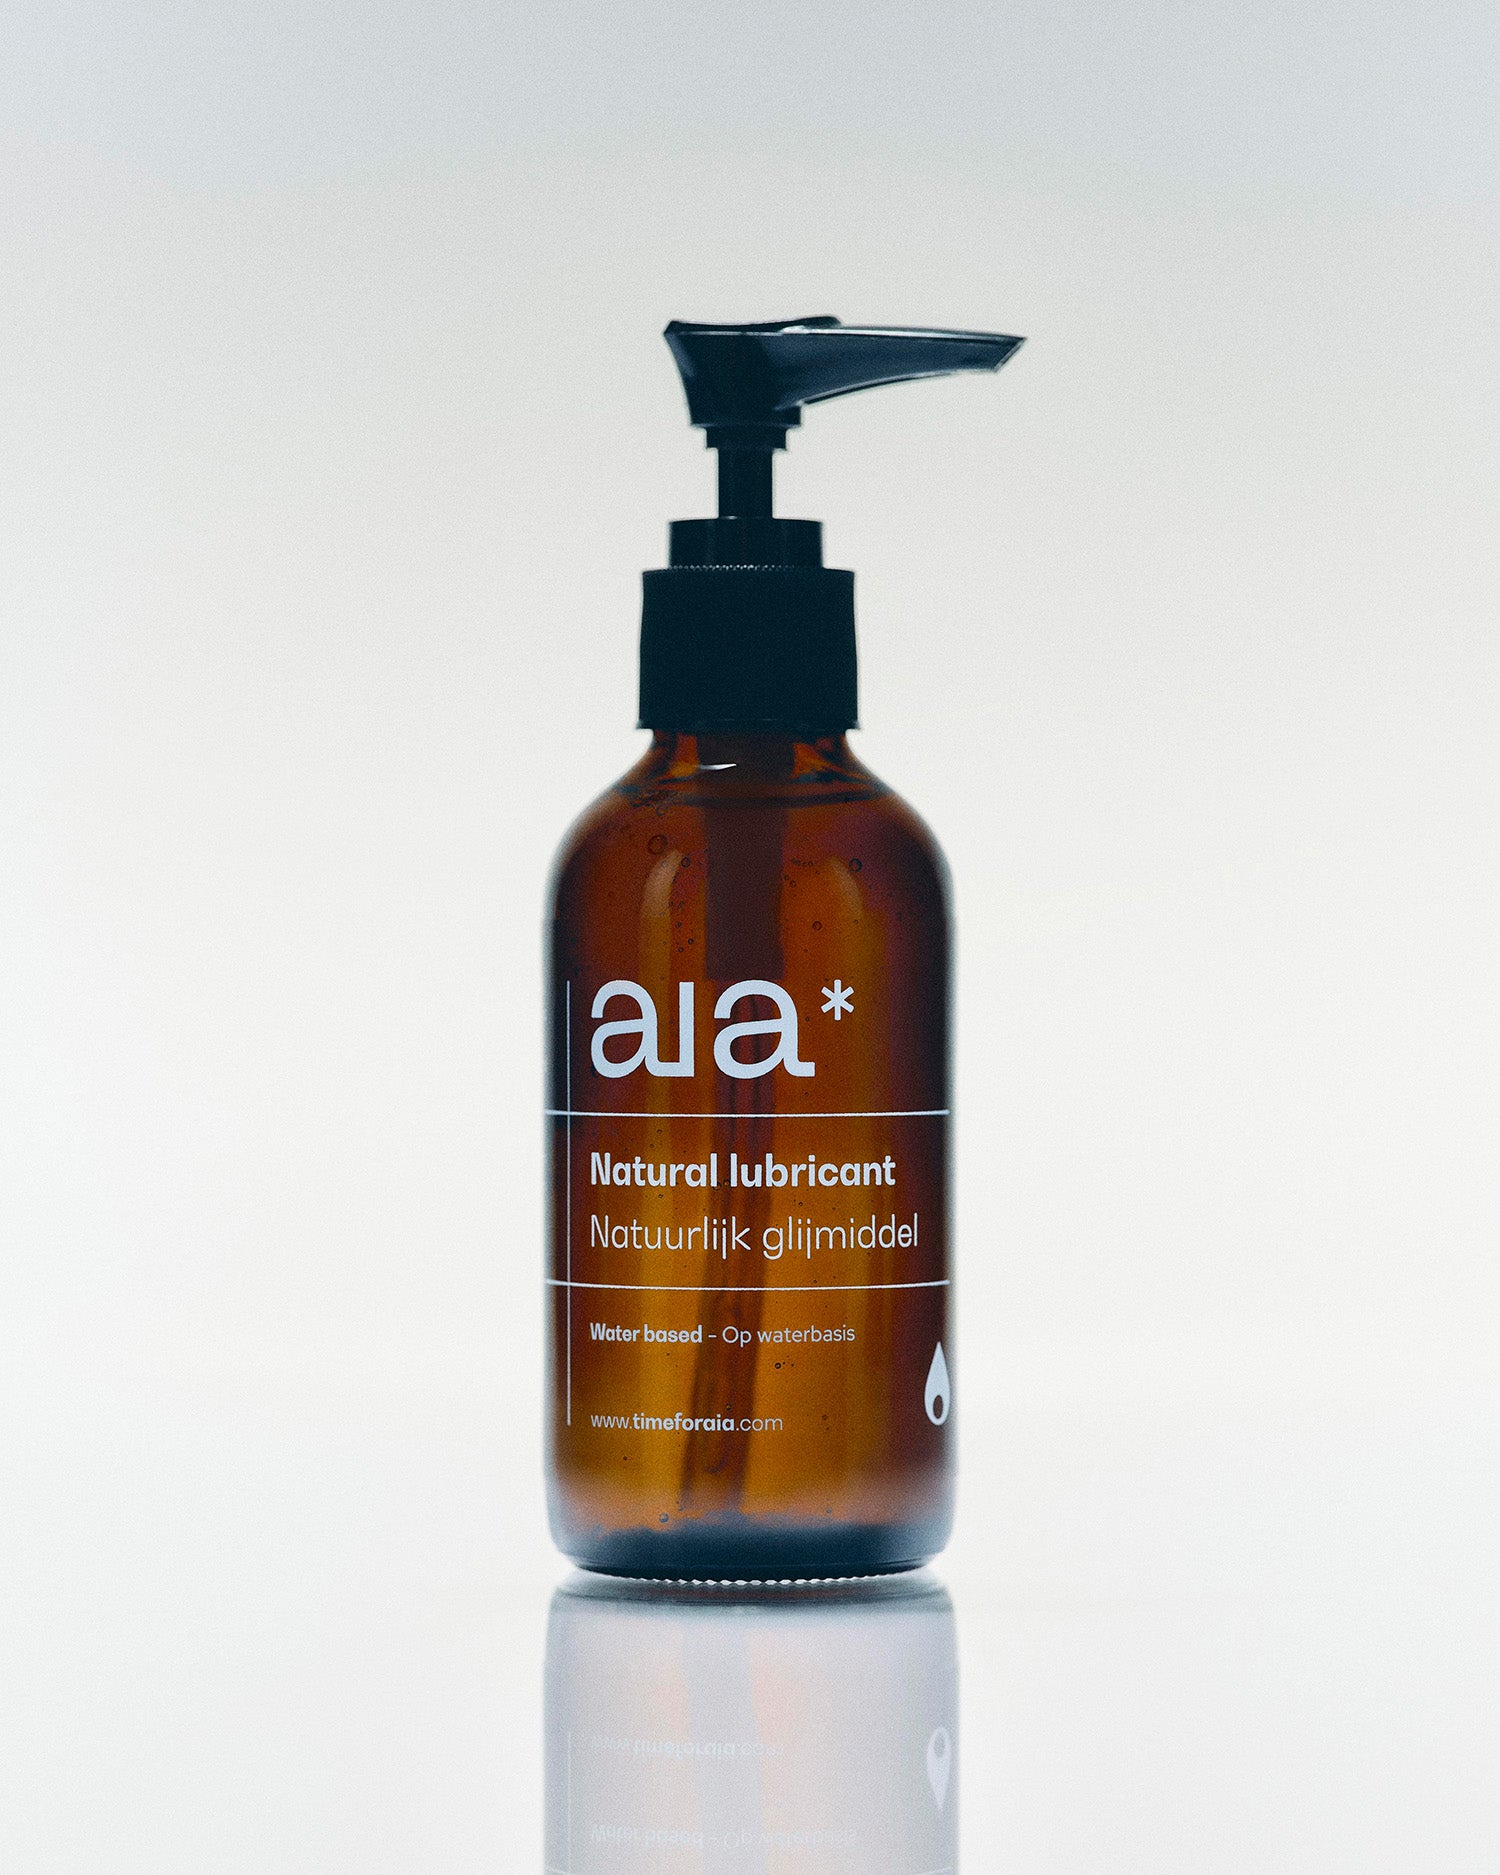 Aia* 100% natural lubricant on trus.store